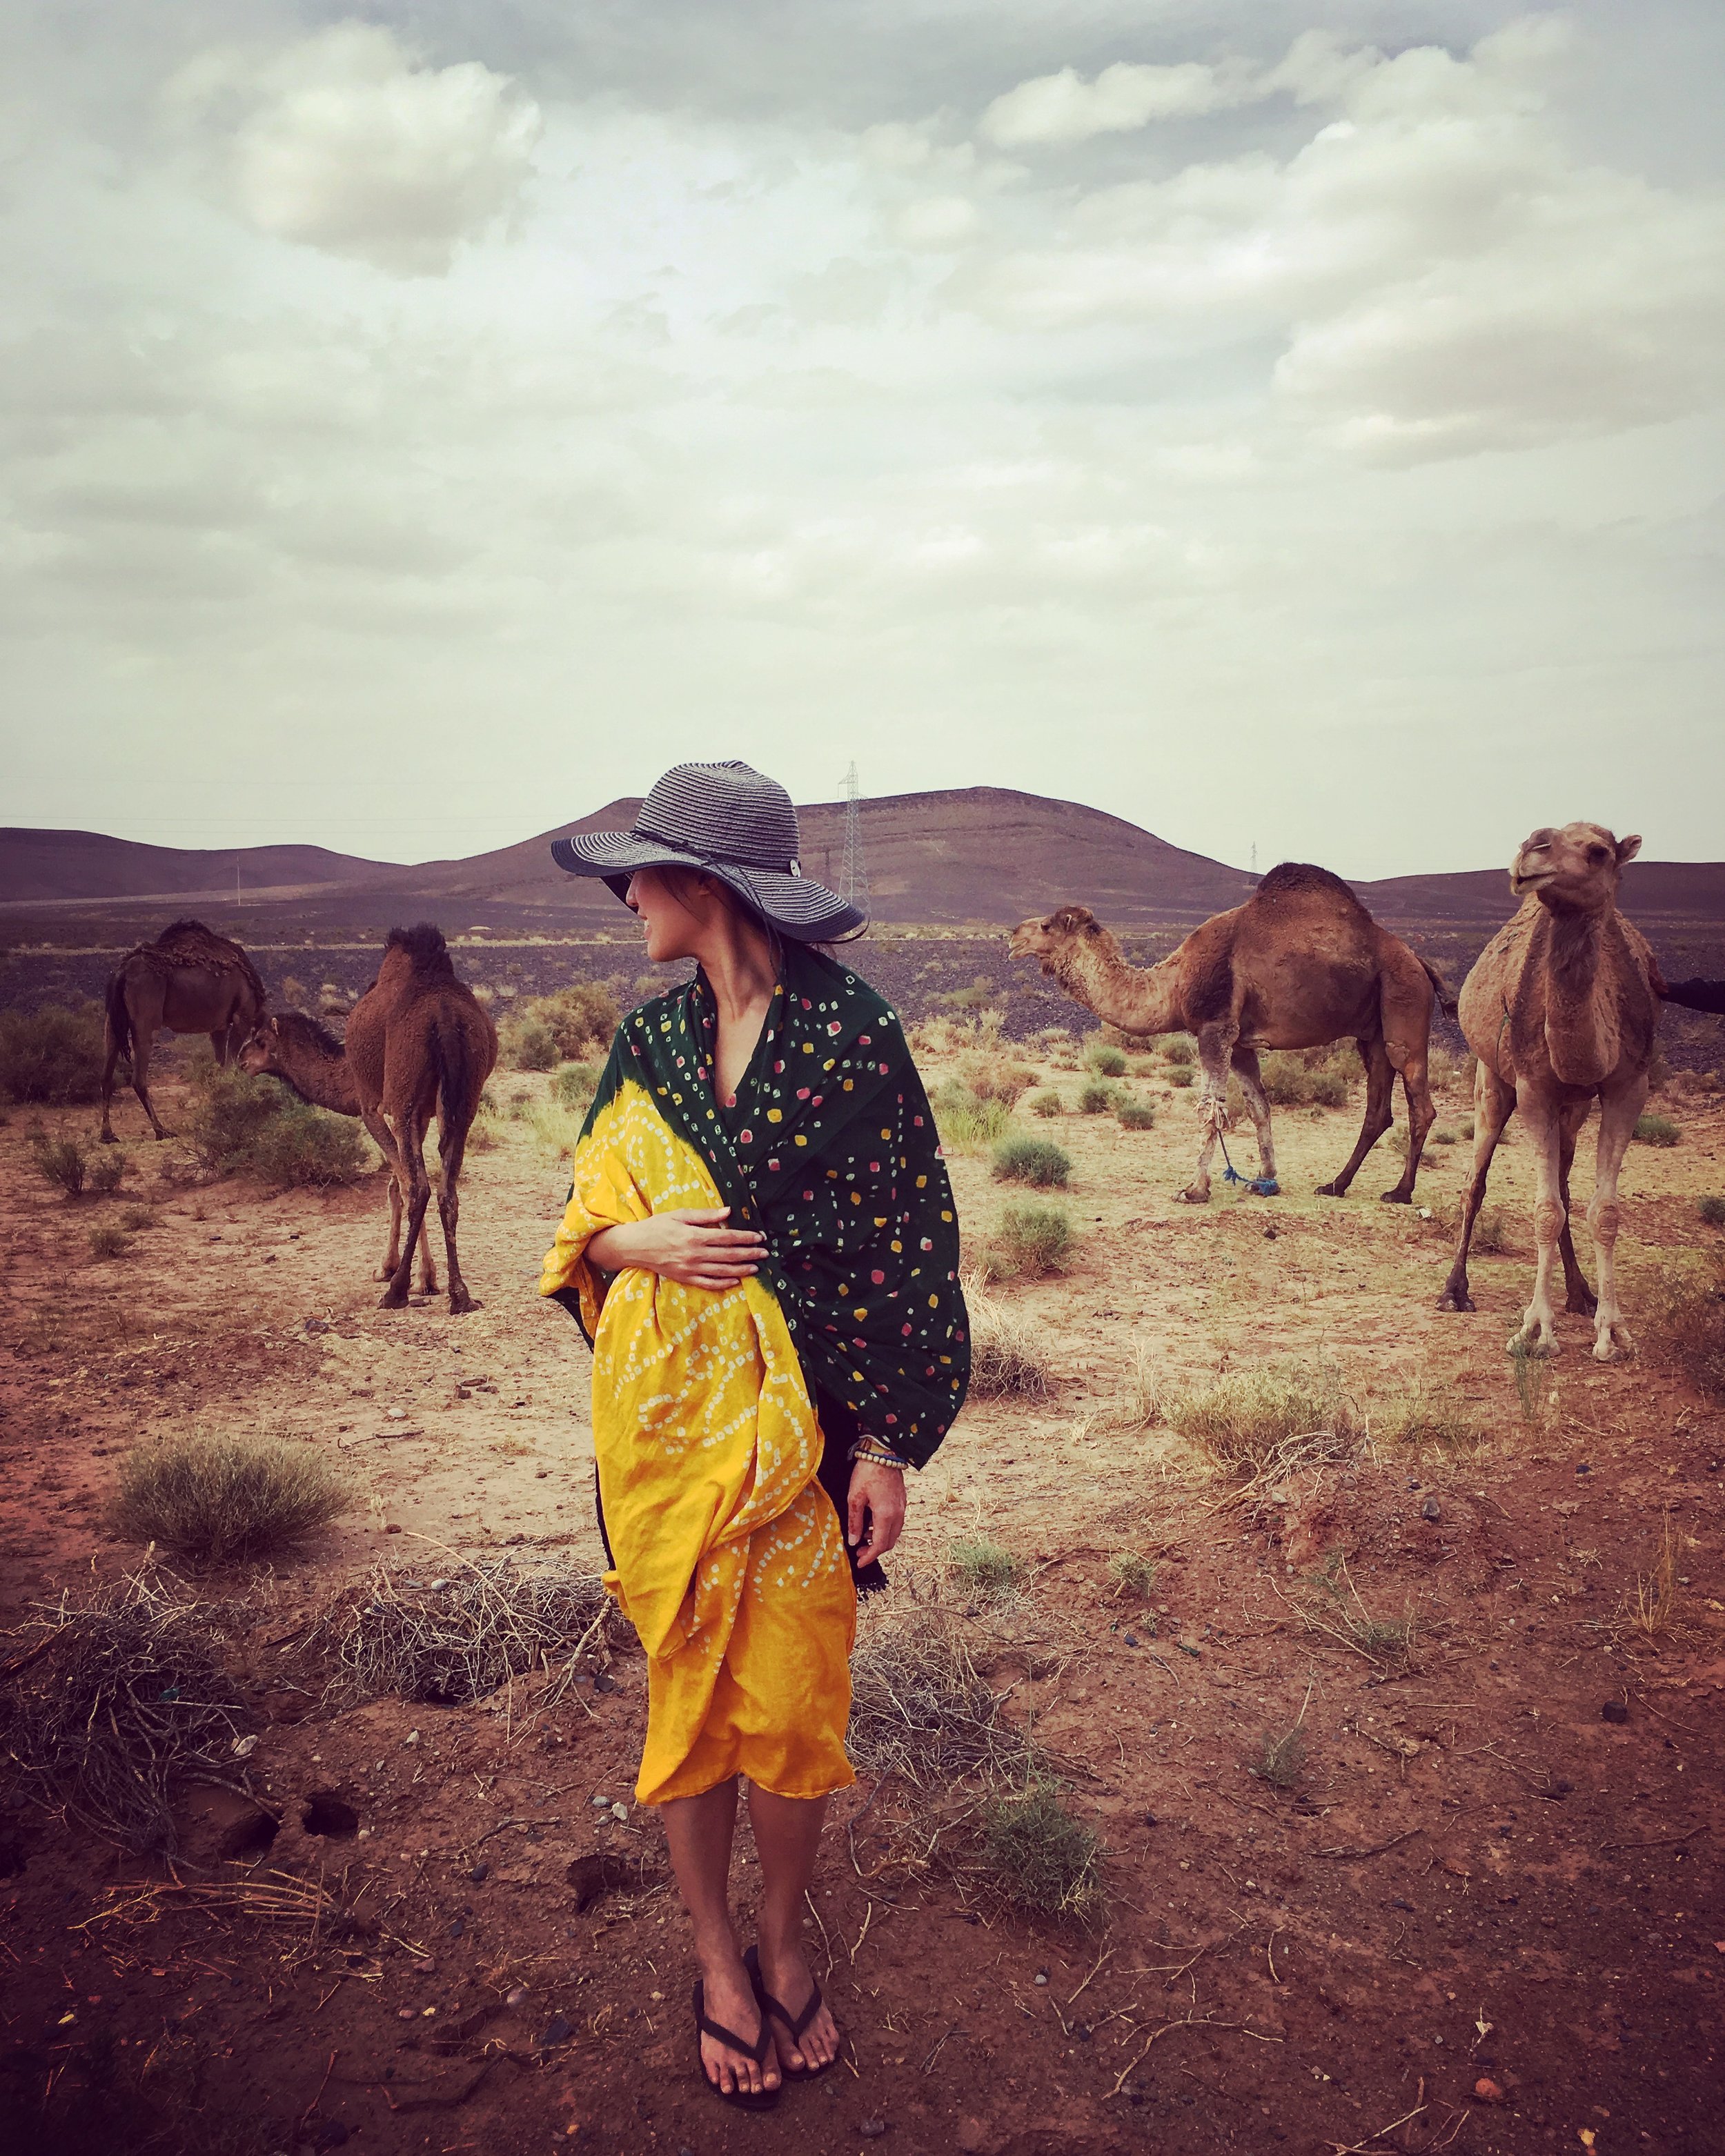 Strike a pose with roadside camels